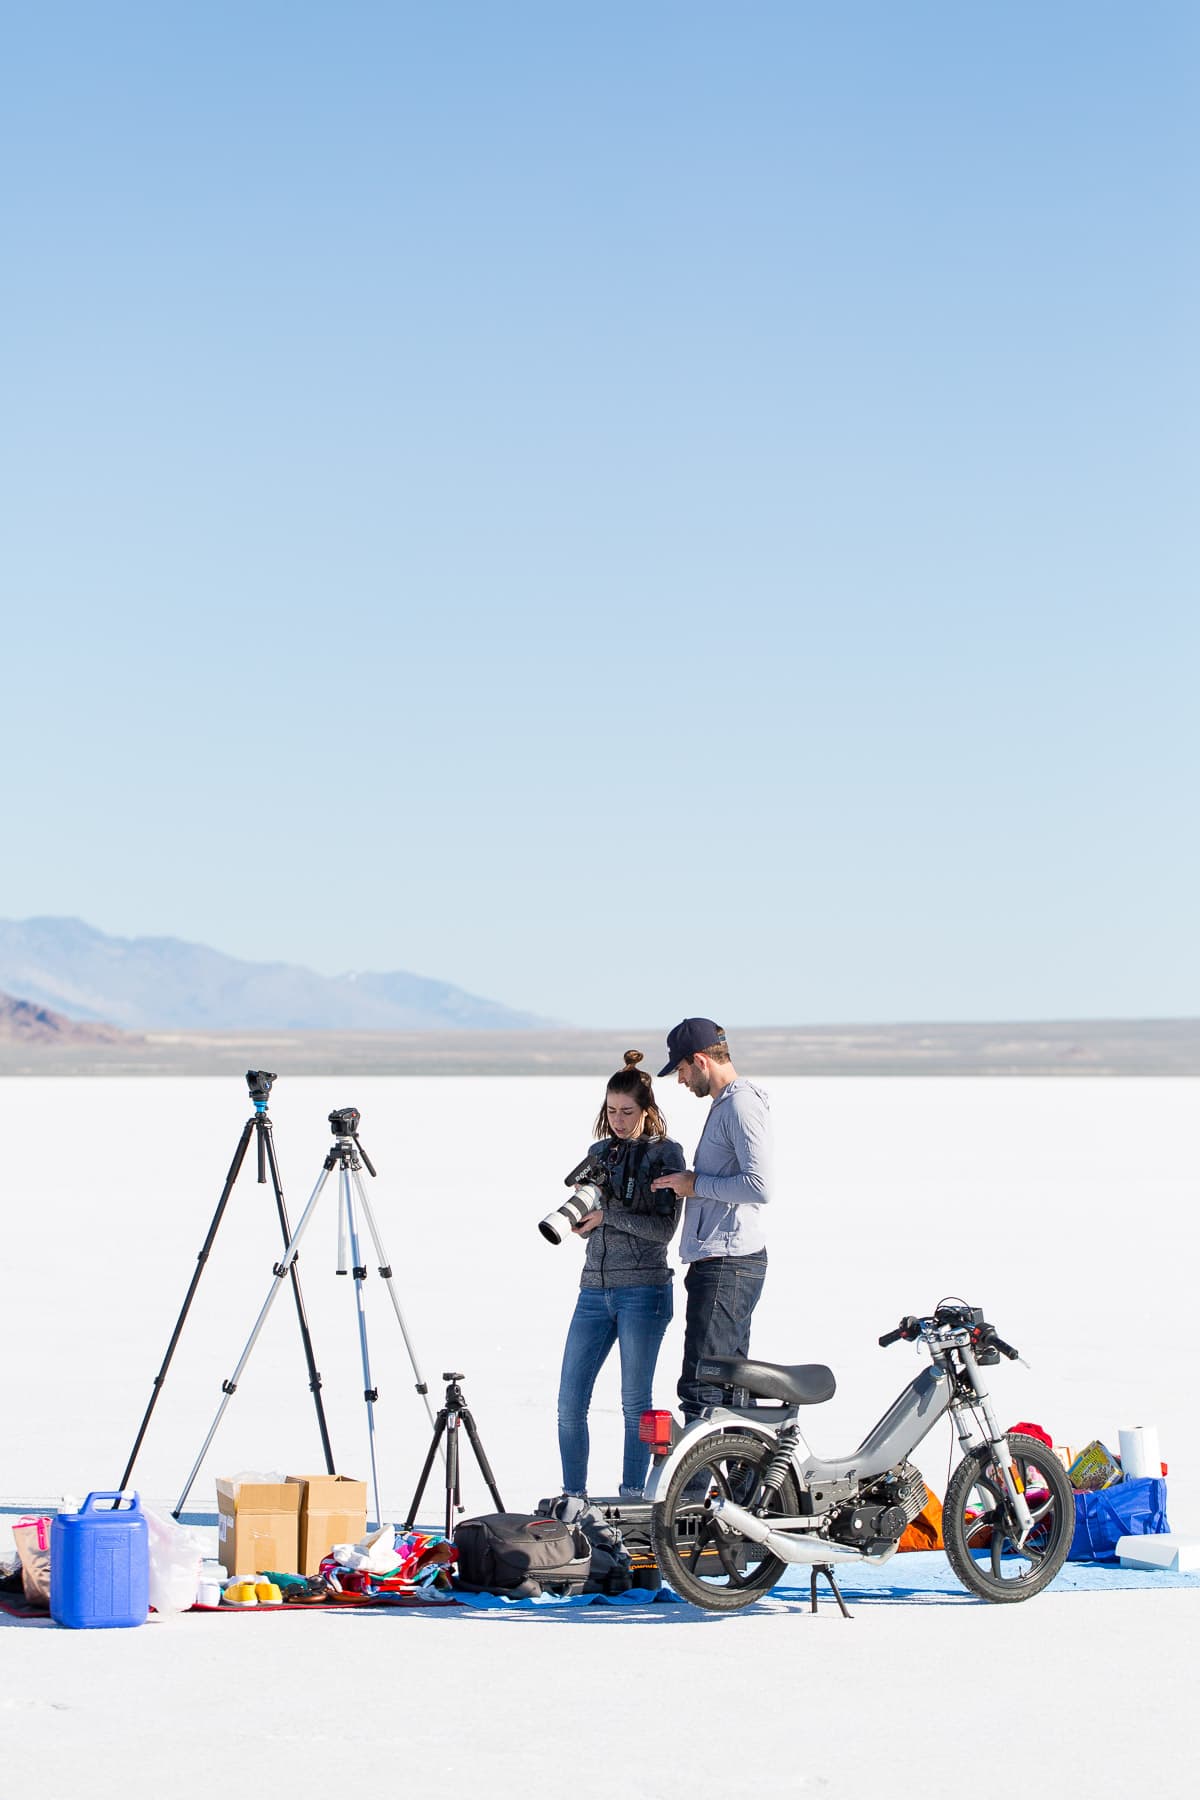 be you, you are enough: our salt flats video and photo shoot - sugar and cloth - houston blogger - youtube 